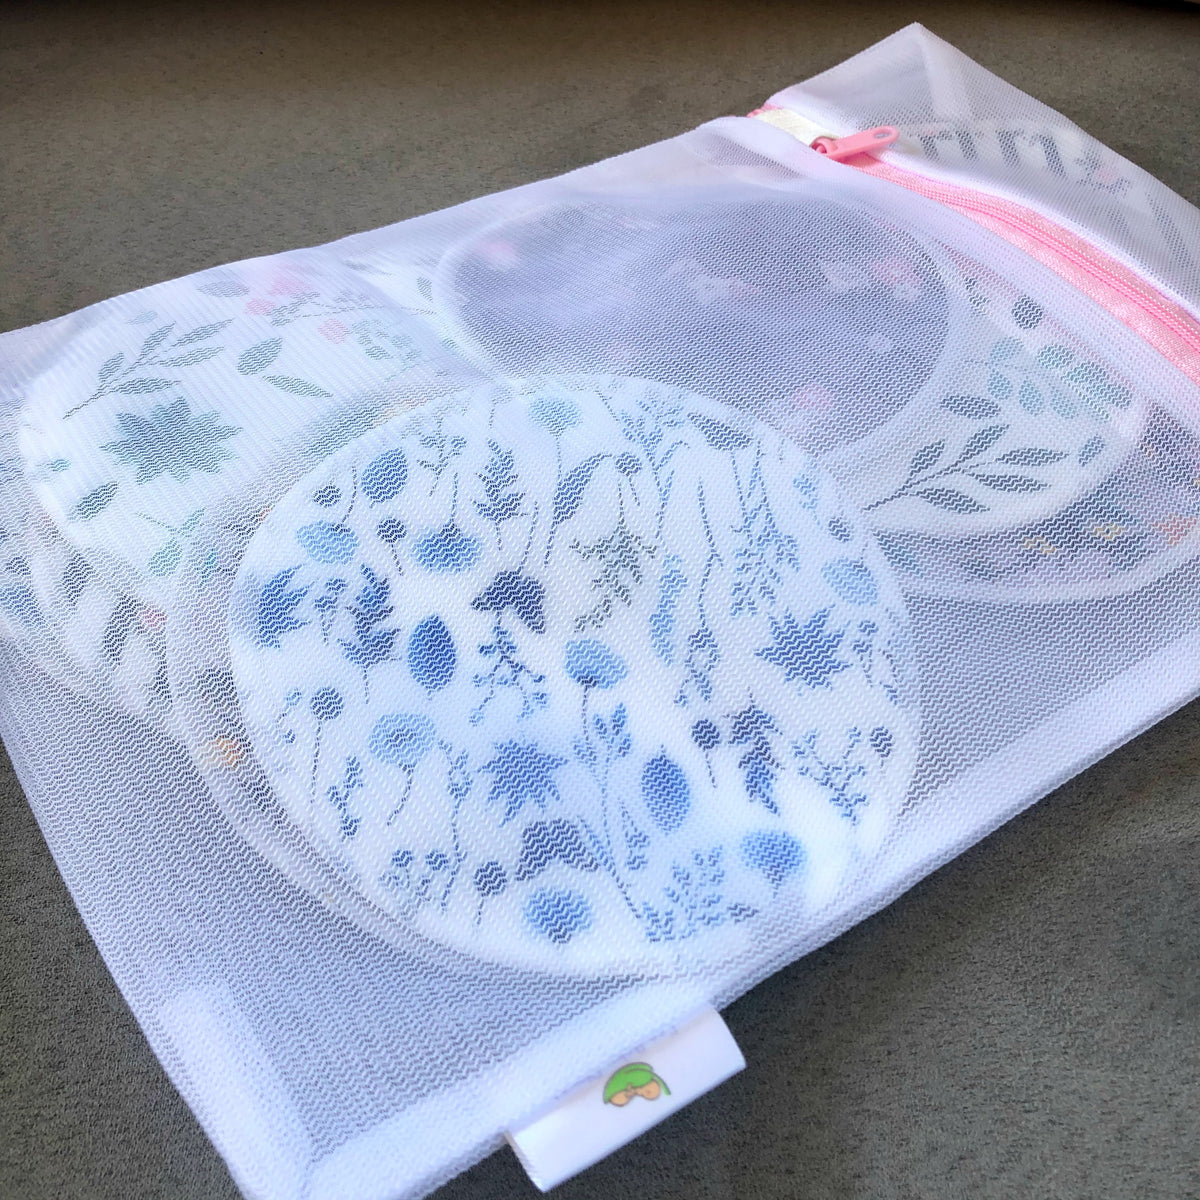 Reusable Breast Pads (12 Pack) - Washable Organic Bamboo Nursing Pads (Fabric Pouch + Laundry Bag included)